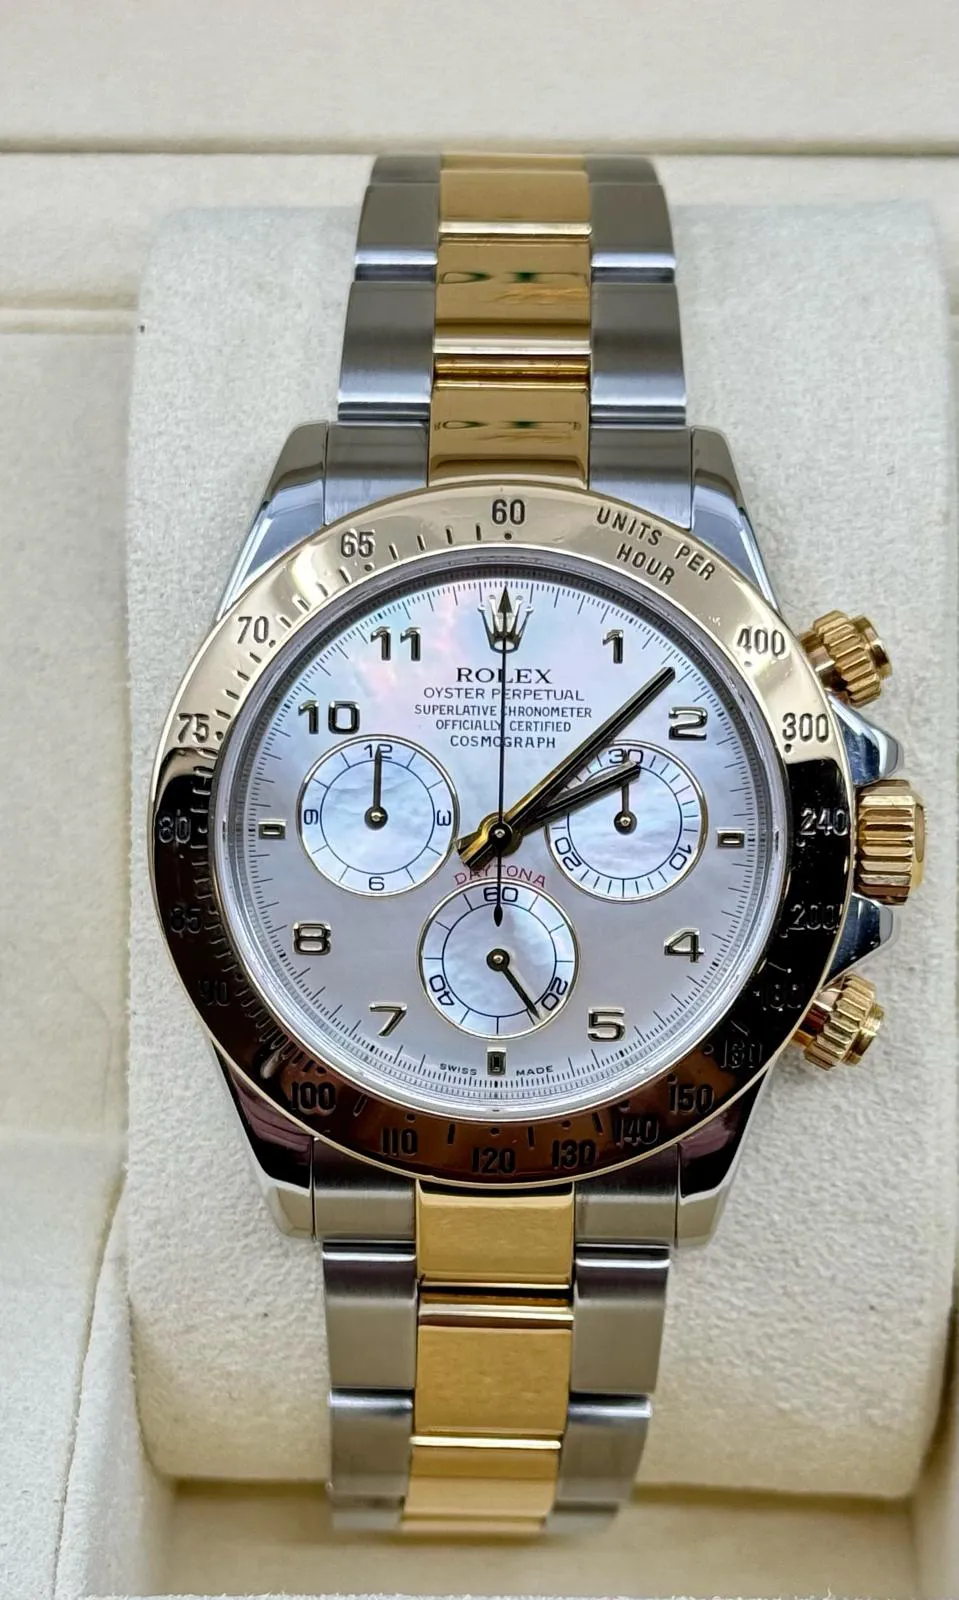 Rolex Daytona 116523 40mm Yellow gold and stainless steel Mother-of-pearl